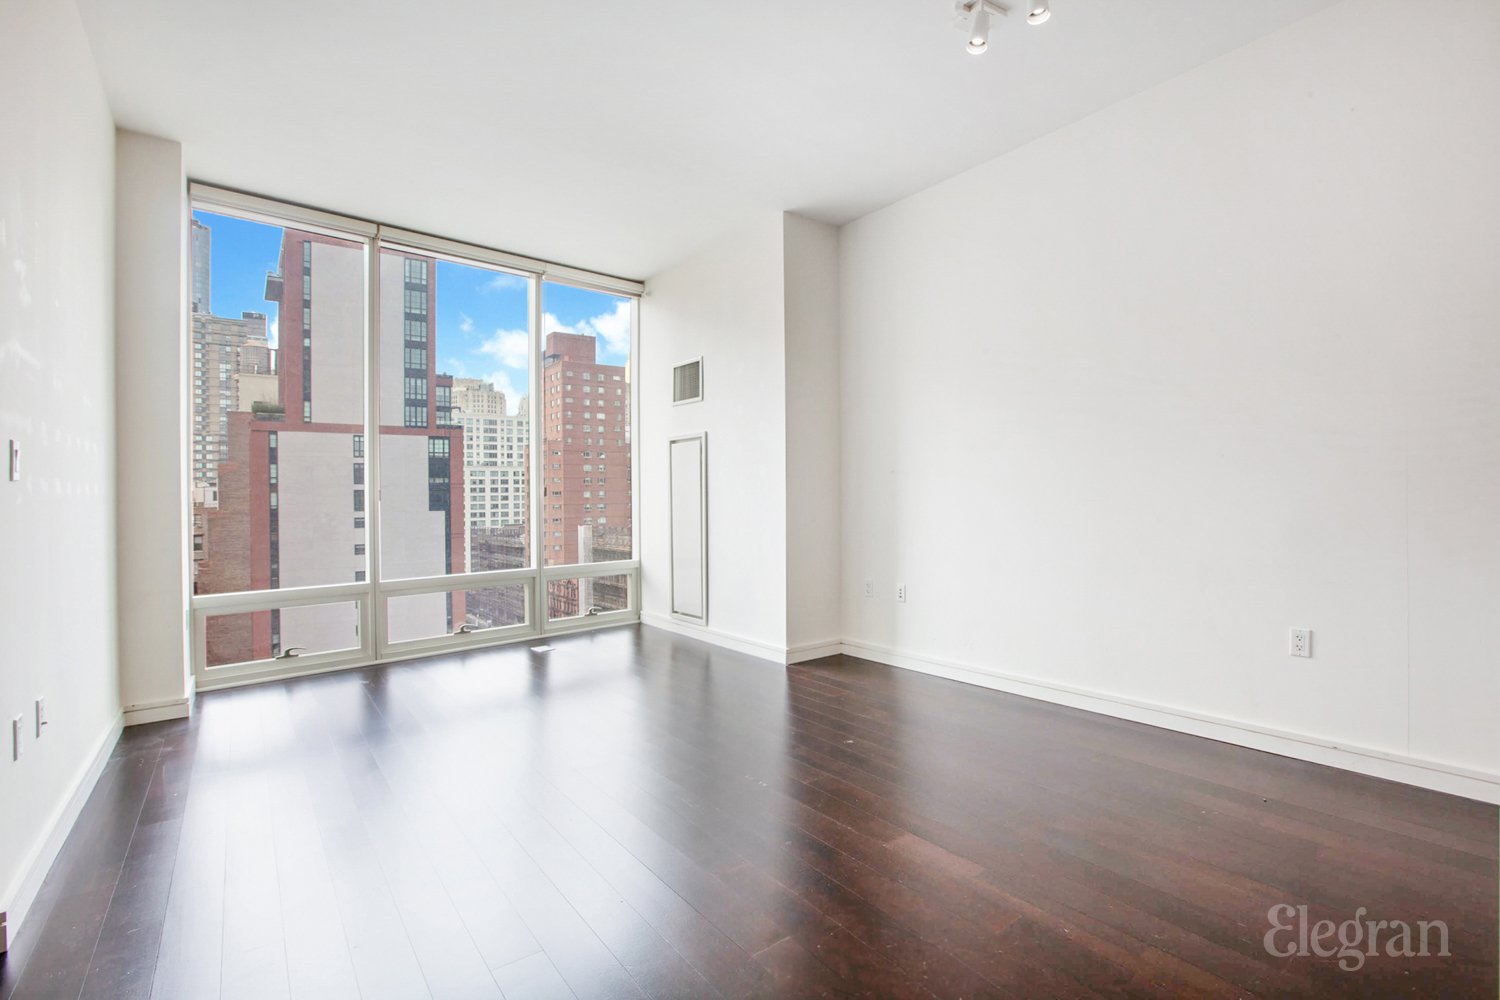 300 East 23rd Street 11-F, Gramercy Park, Downtown, NYC - 1 Bedrooms  
1 Bathrooms  
3 Rooms - 